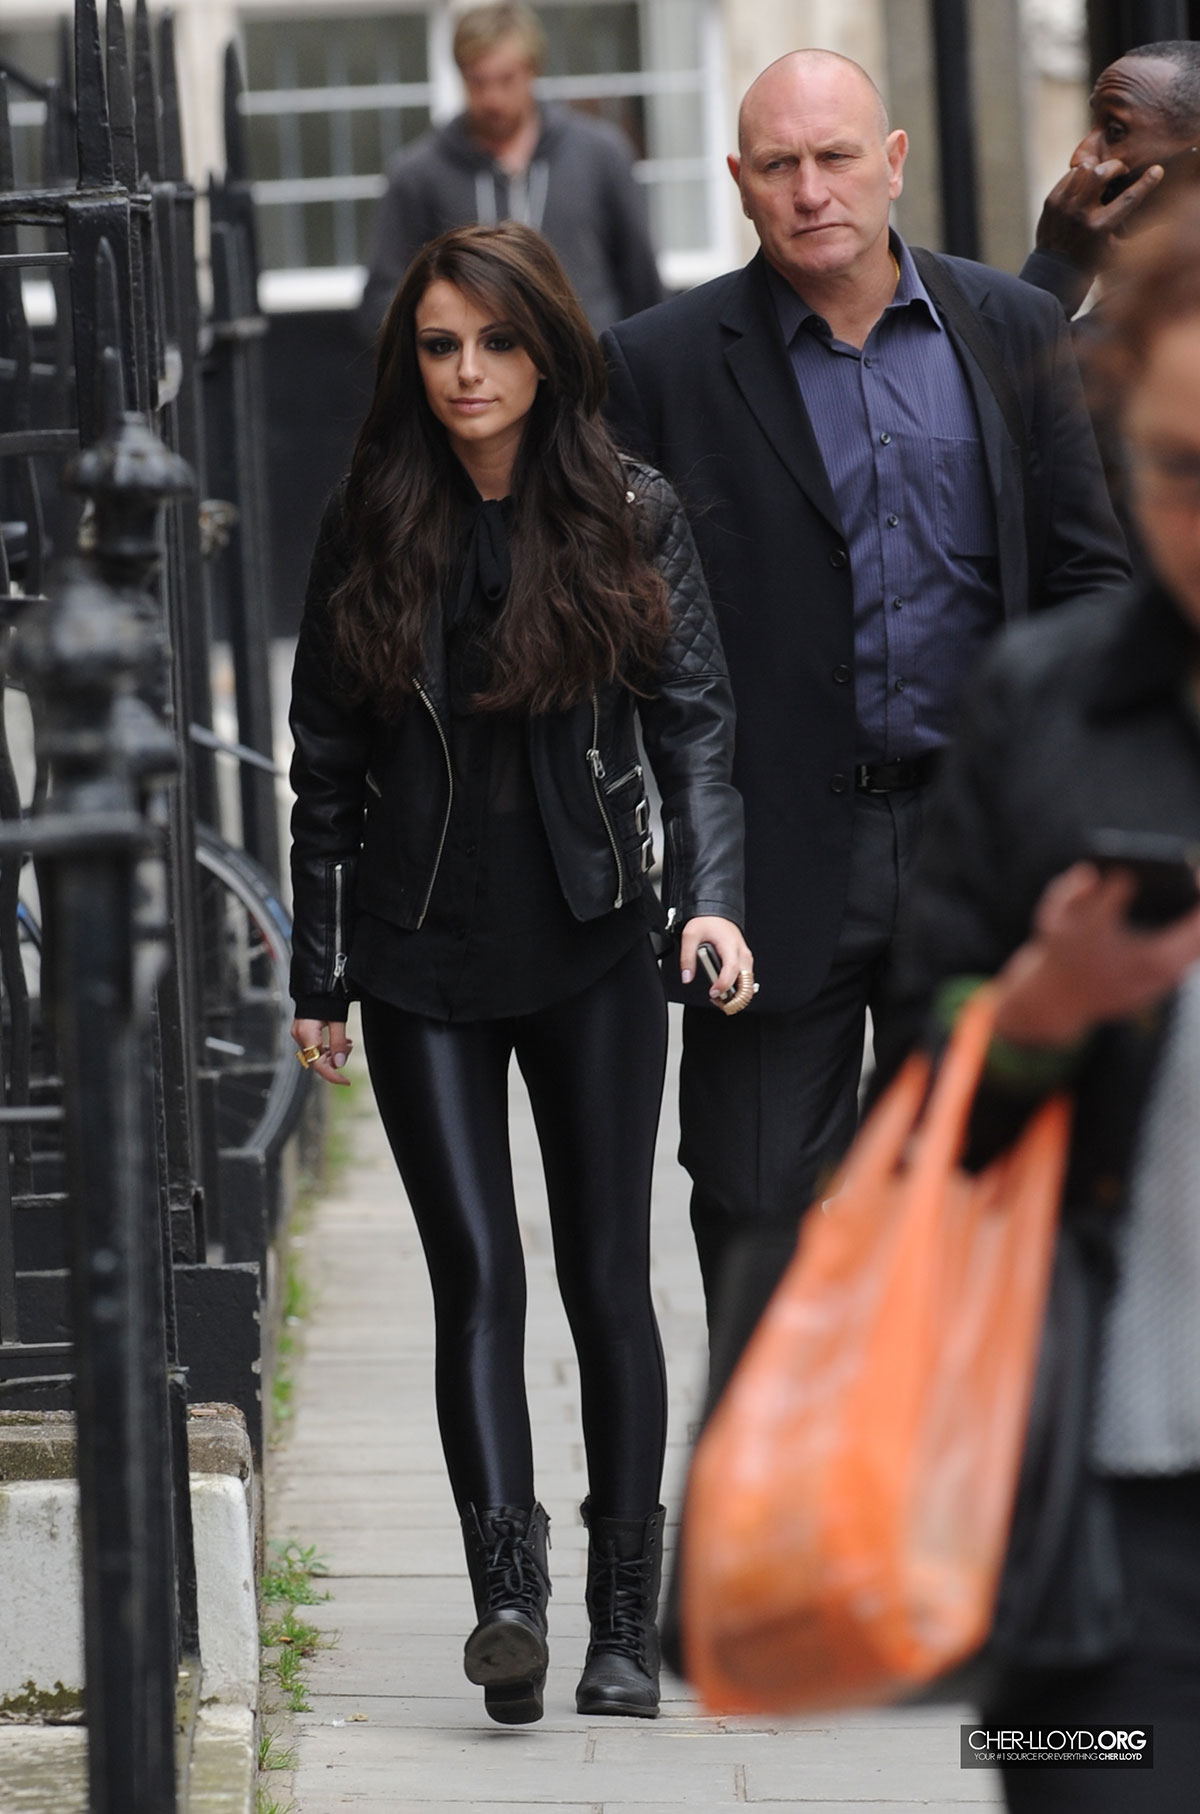 Cher Lloyd at Sony offices in London